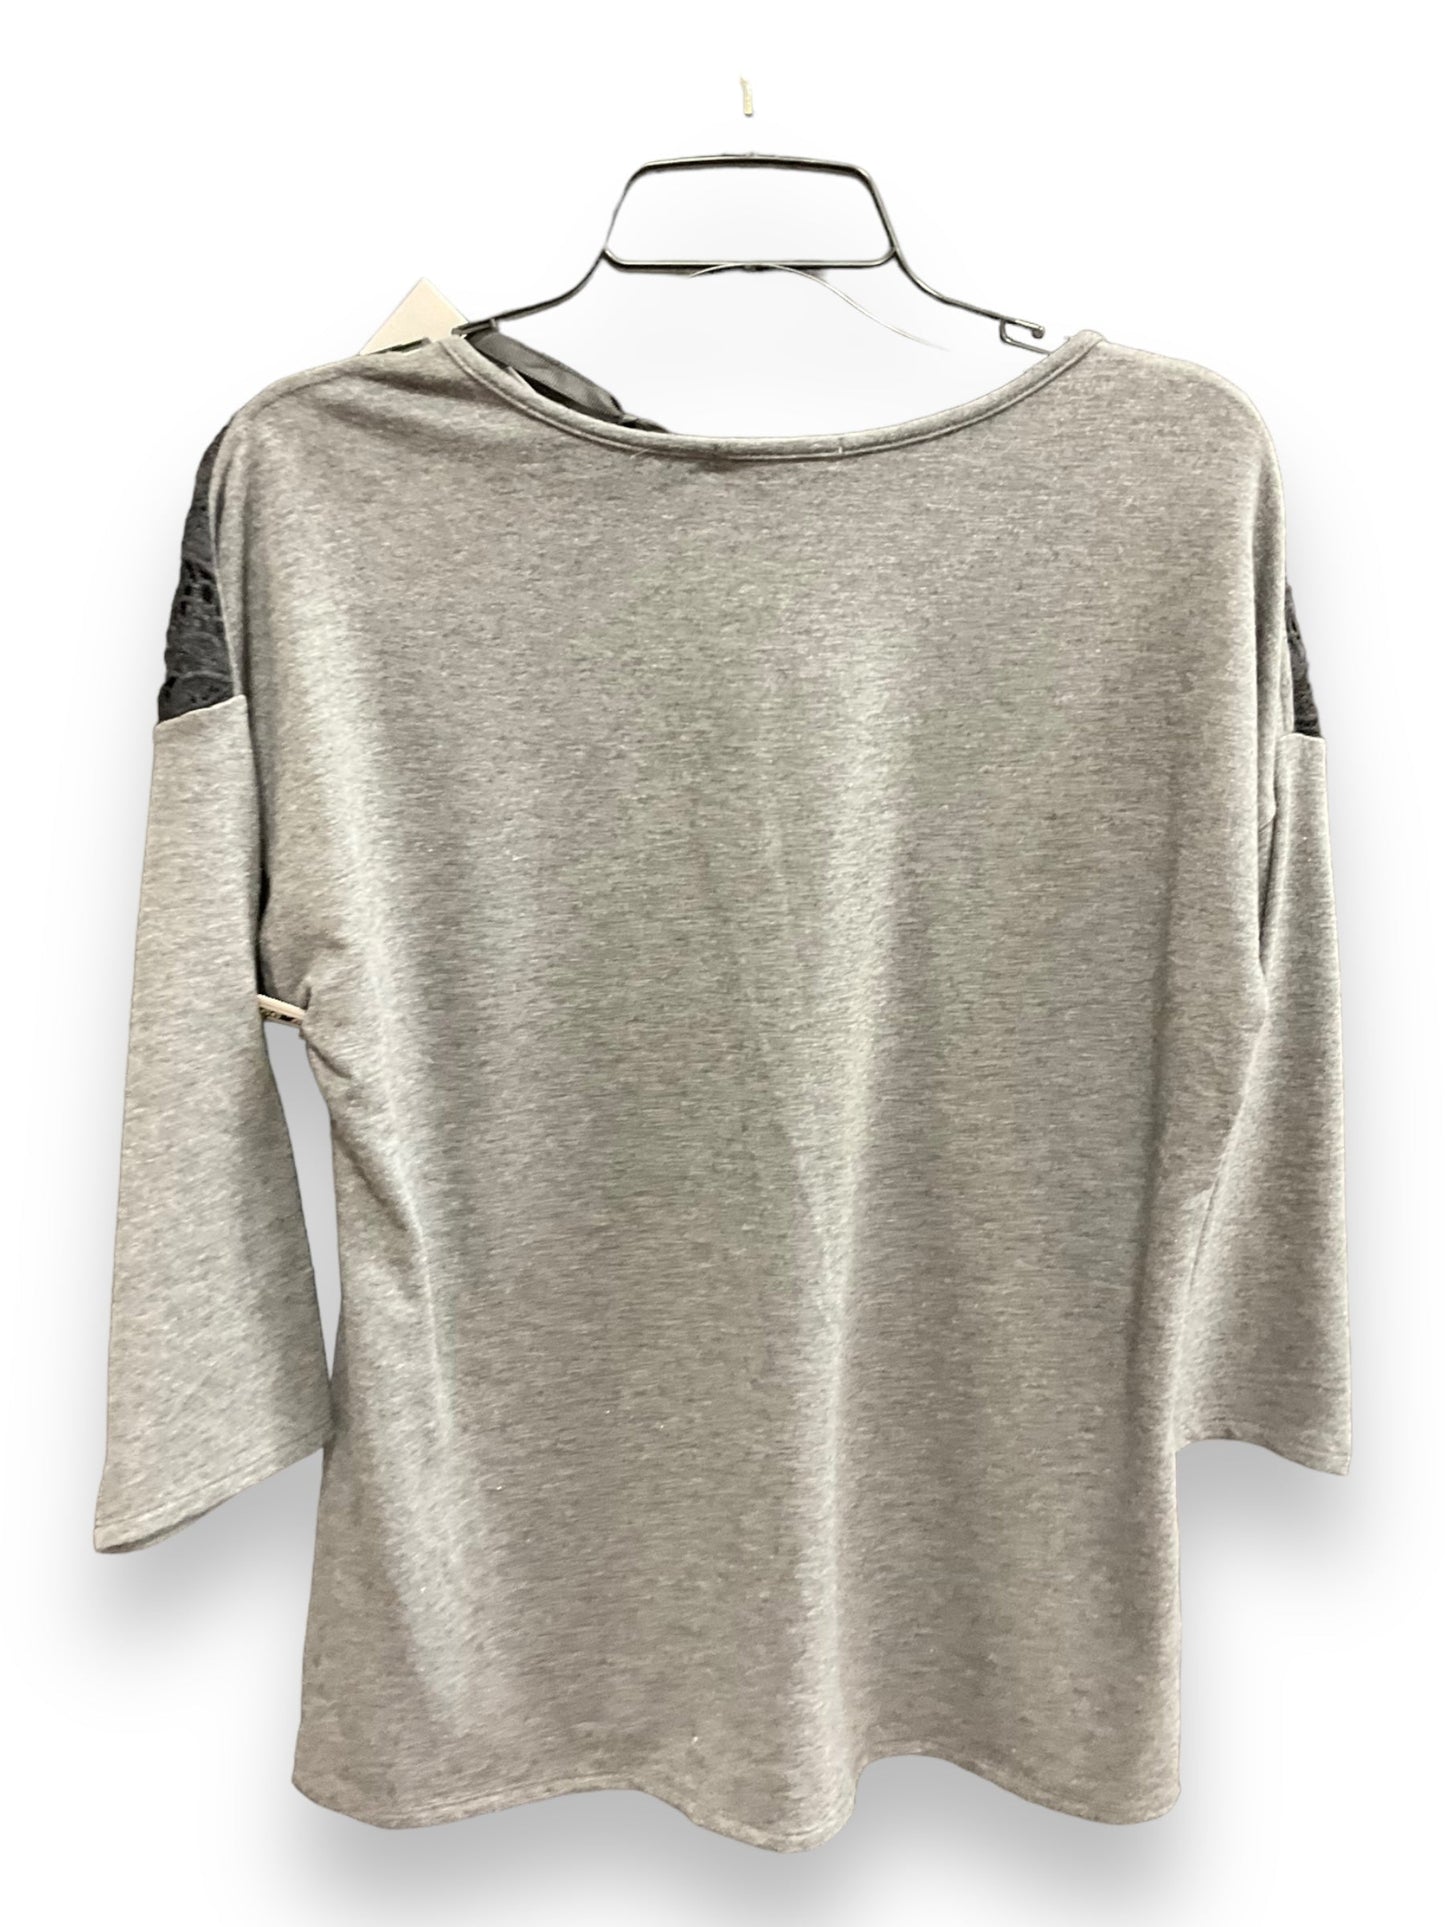 Grey Top Long Sleeve 89th And Madison, Size L